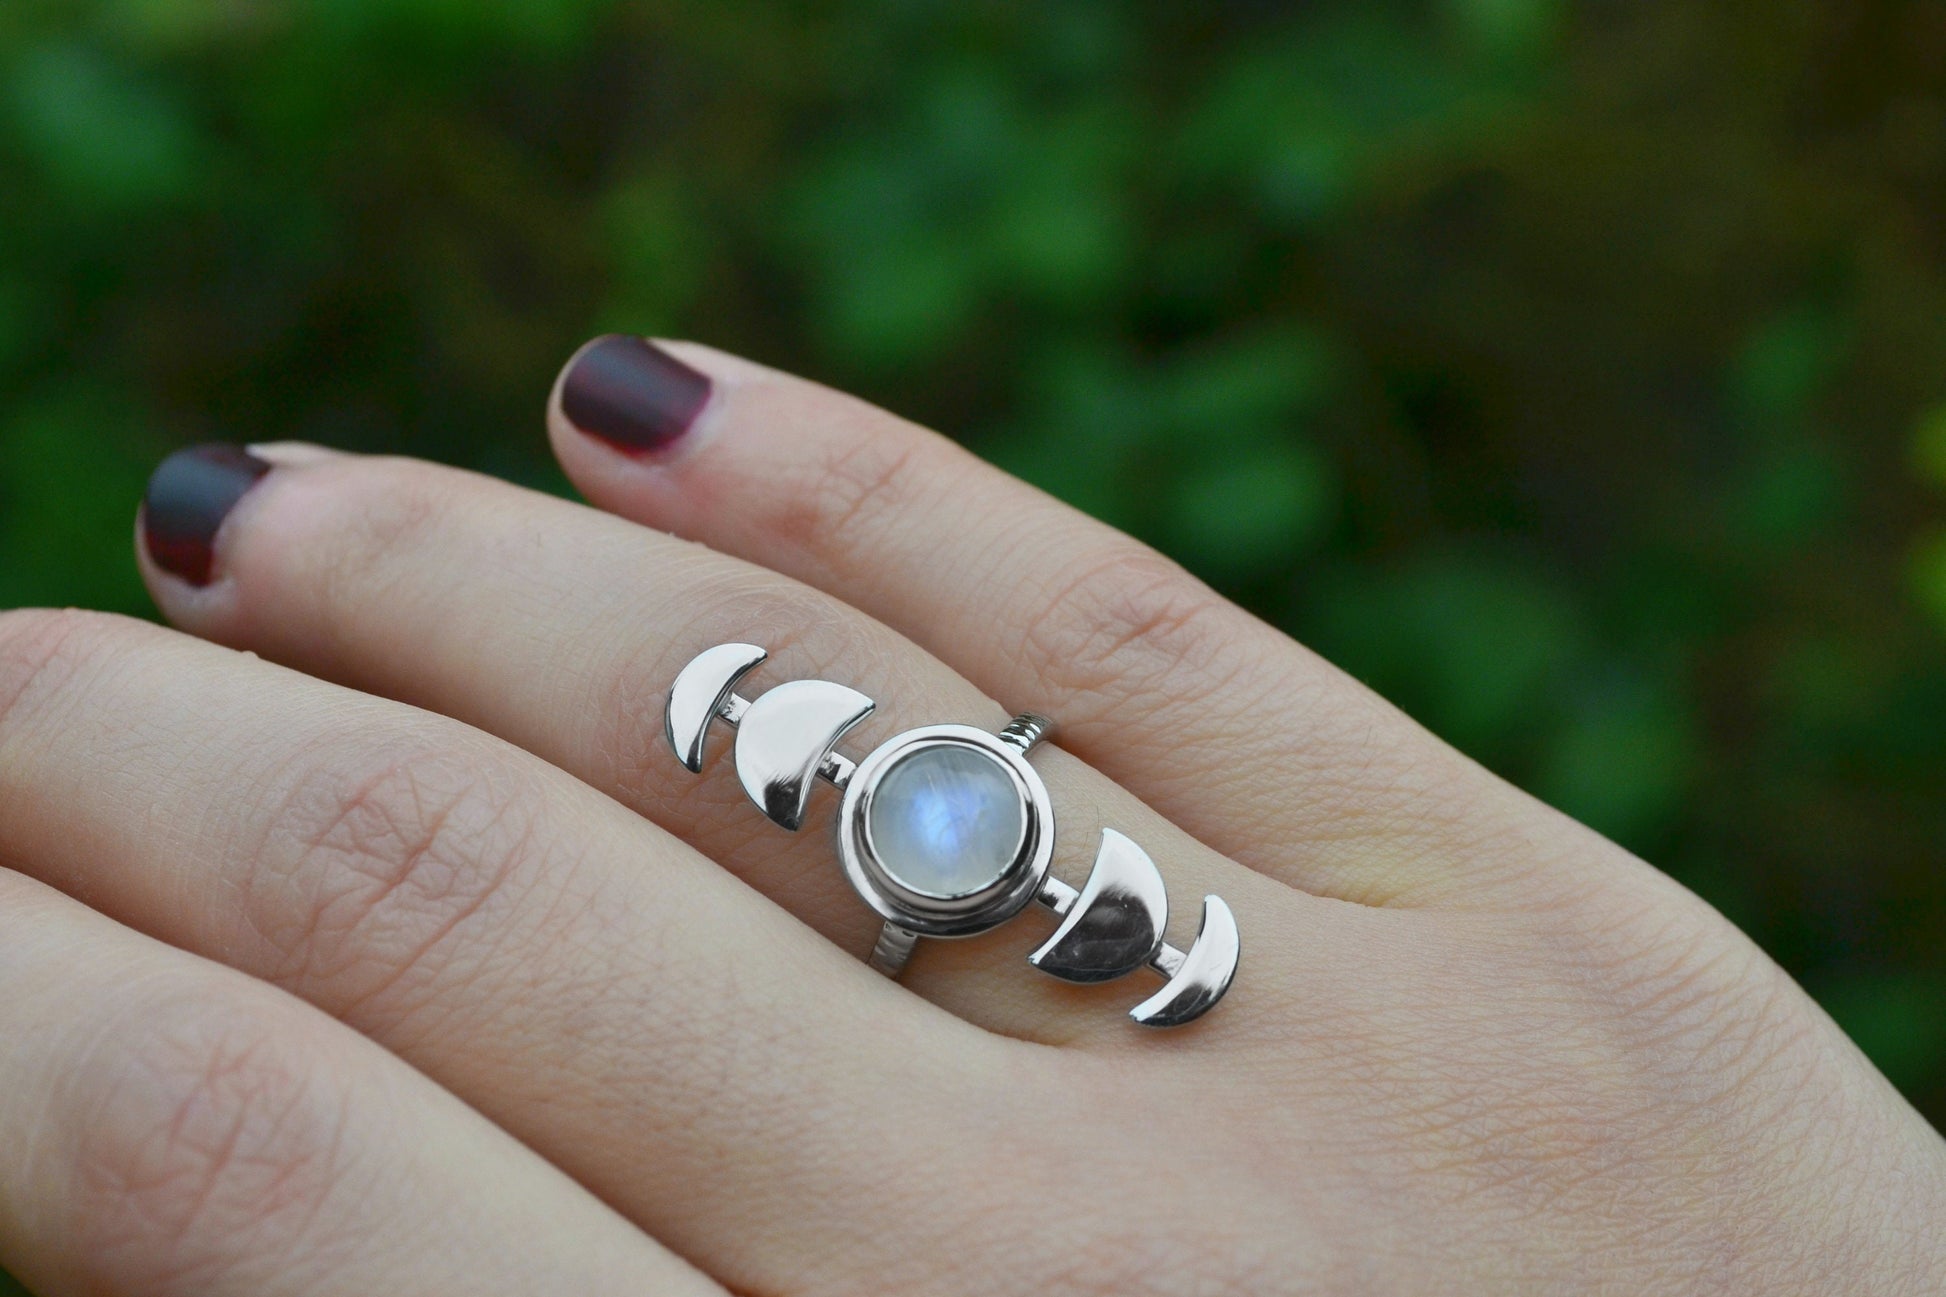 Moon Phases Ring, Moon Ring, Fine Sterling Silver Rainbow Moonstone Ring, Adjustable Ring, Celestial Jewelry, Boho Rings, Unique Gift